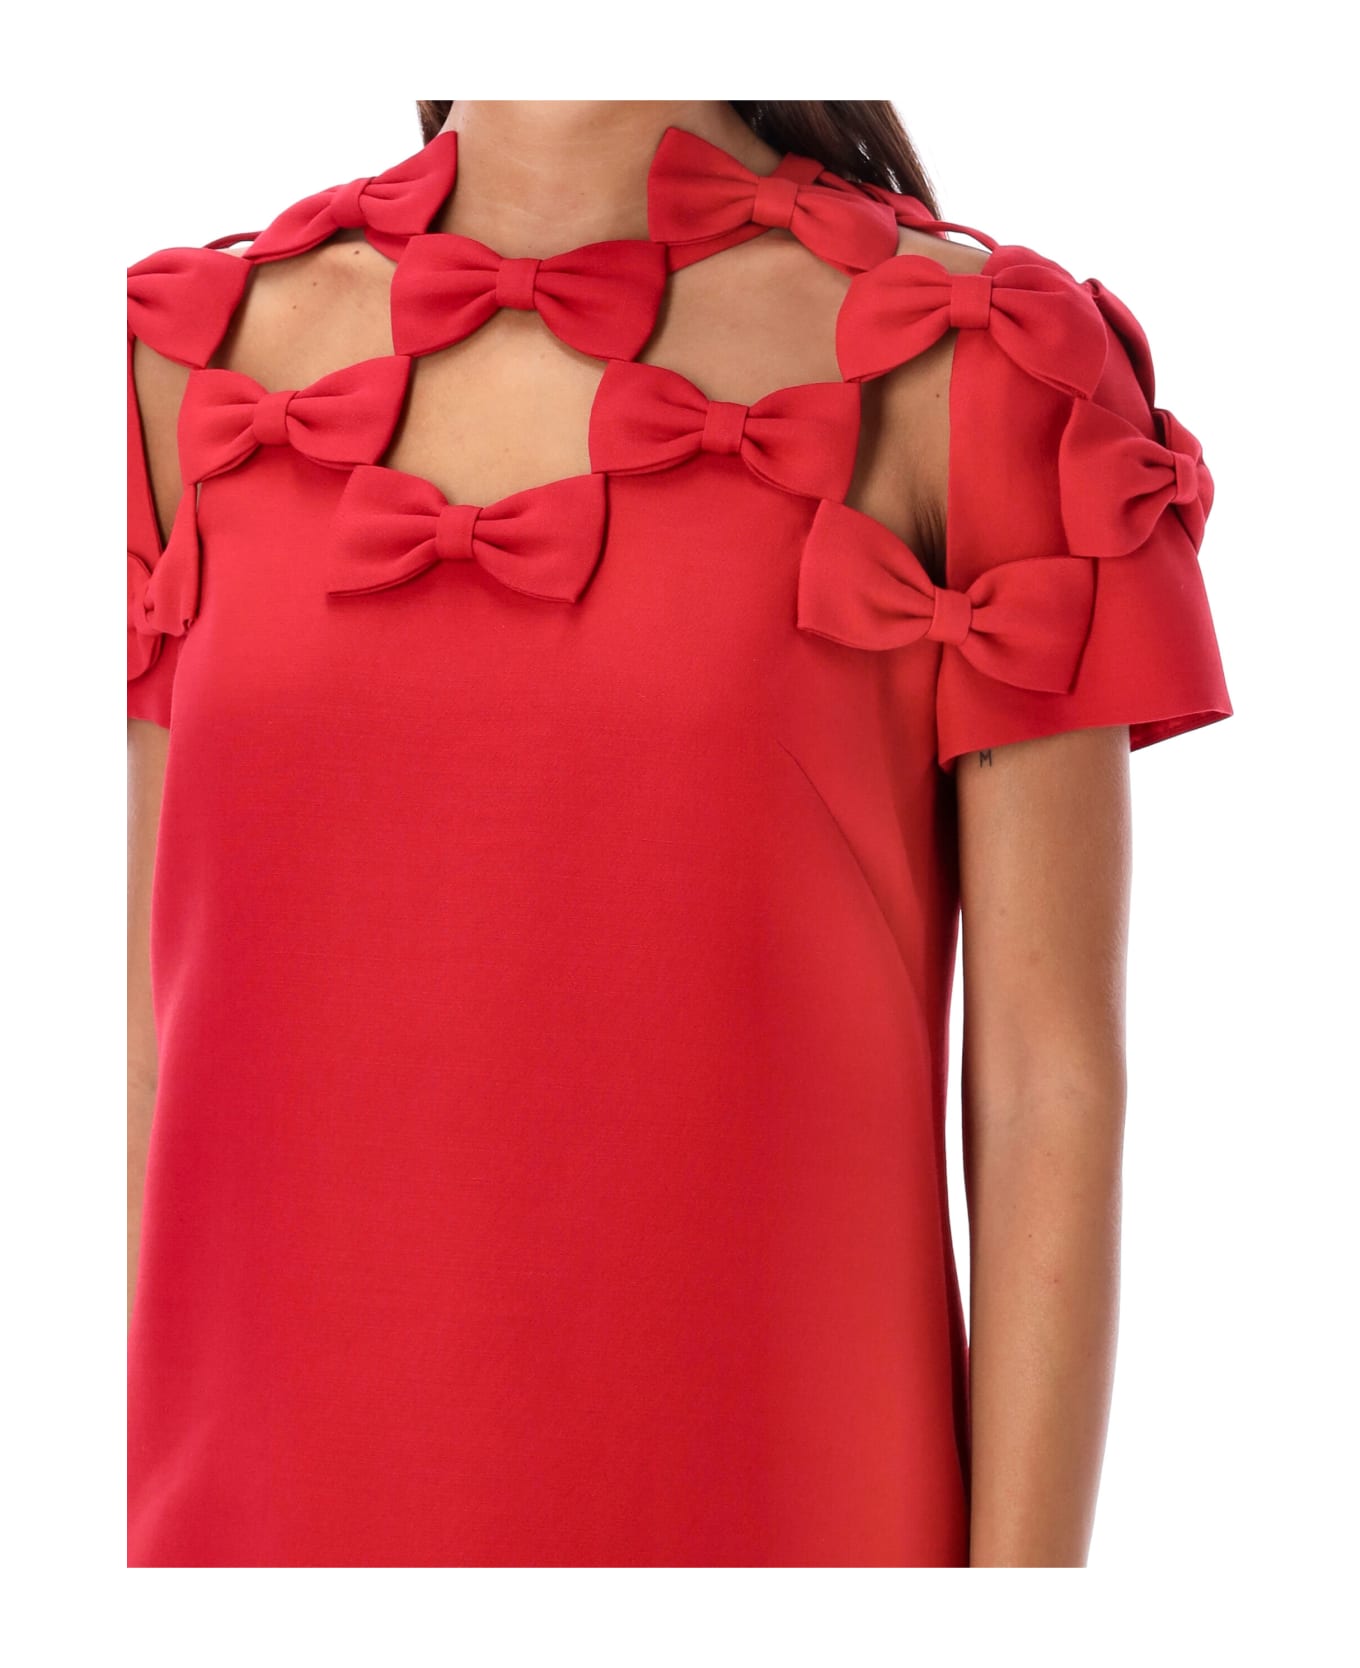 Valentino Garavani Embroidered Crepe Couture Bow Short Dress - RED